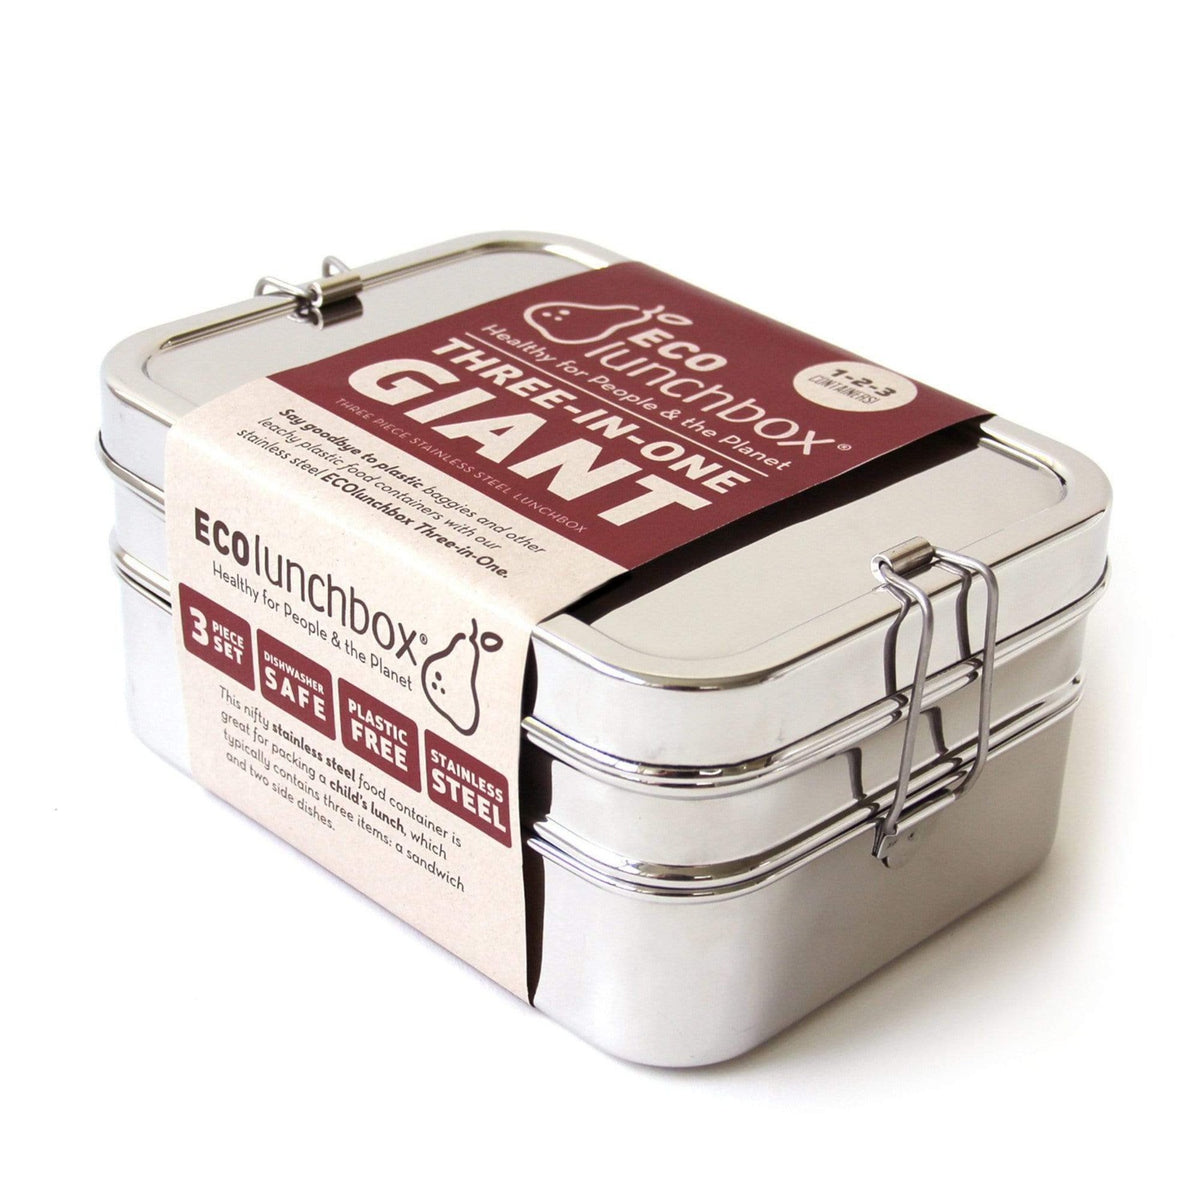 Best Stainless Steel Lunch Containers for Your Lunchbox - Get Green Be Well